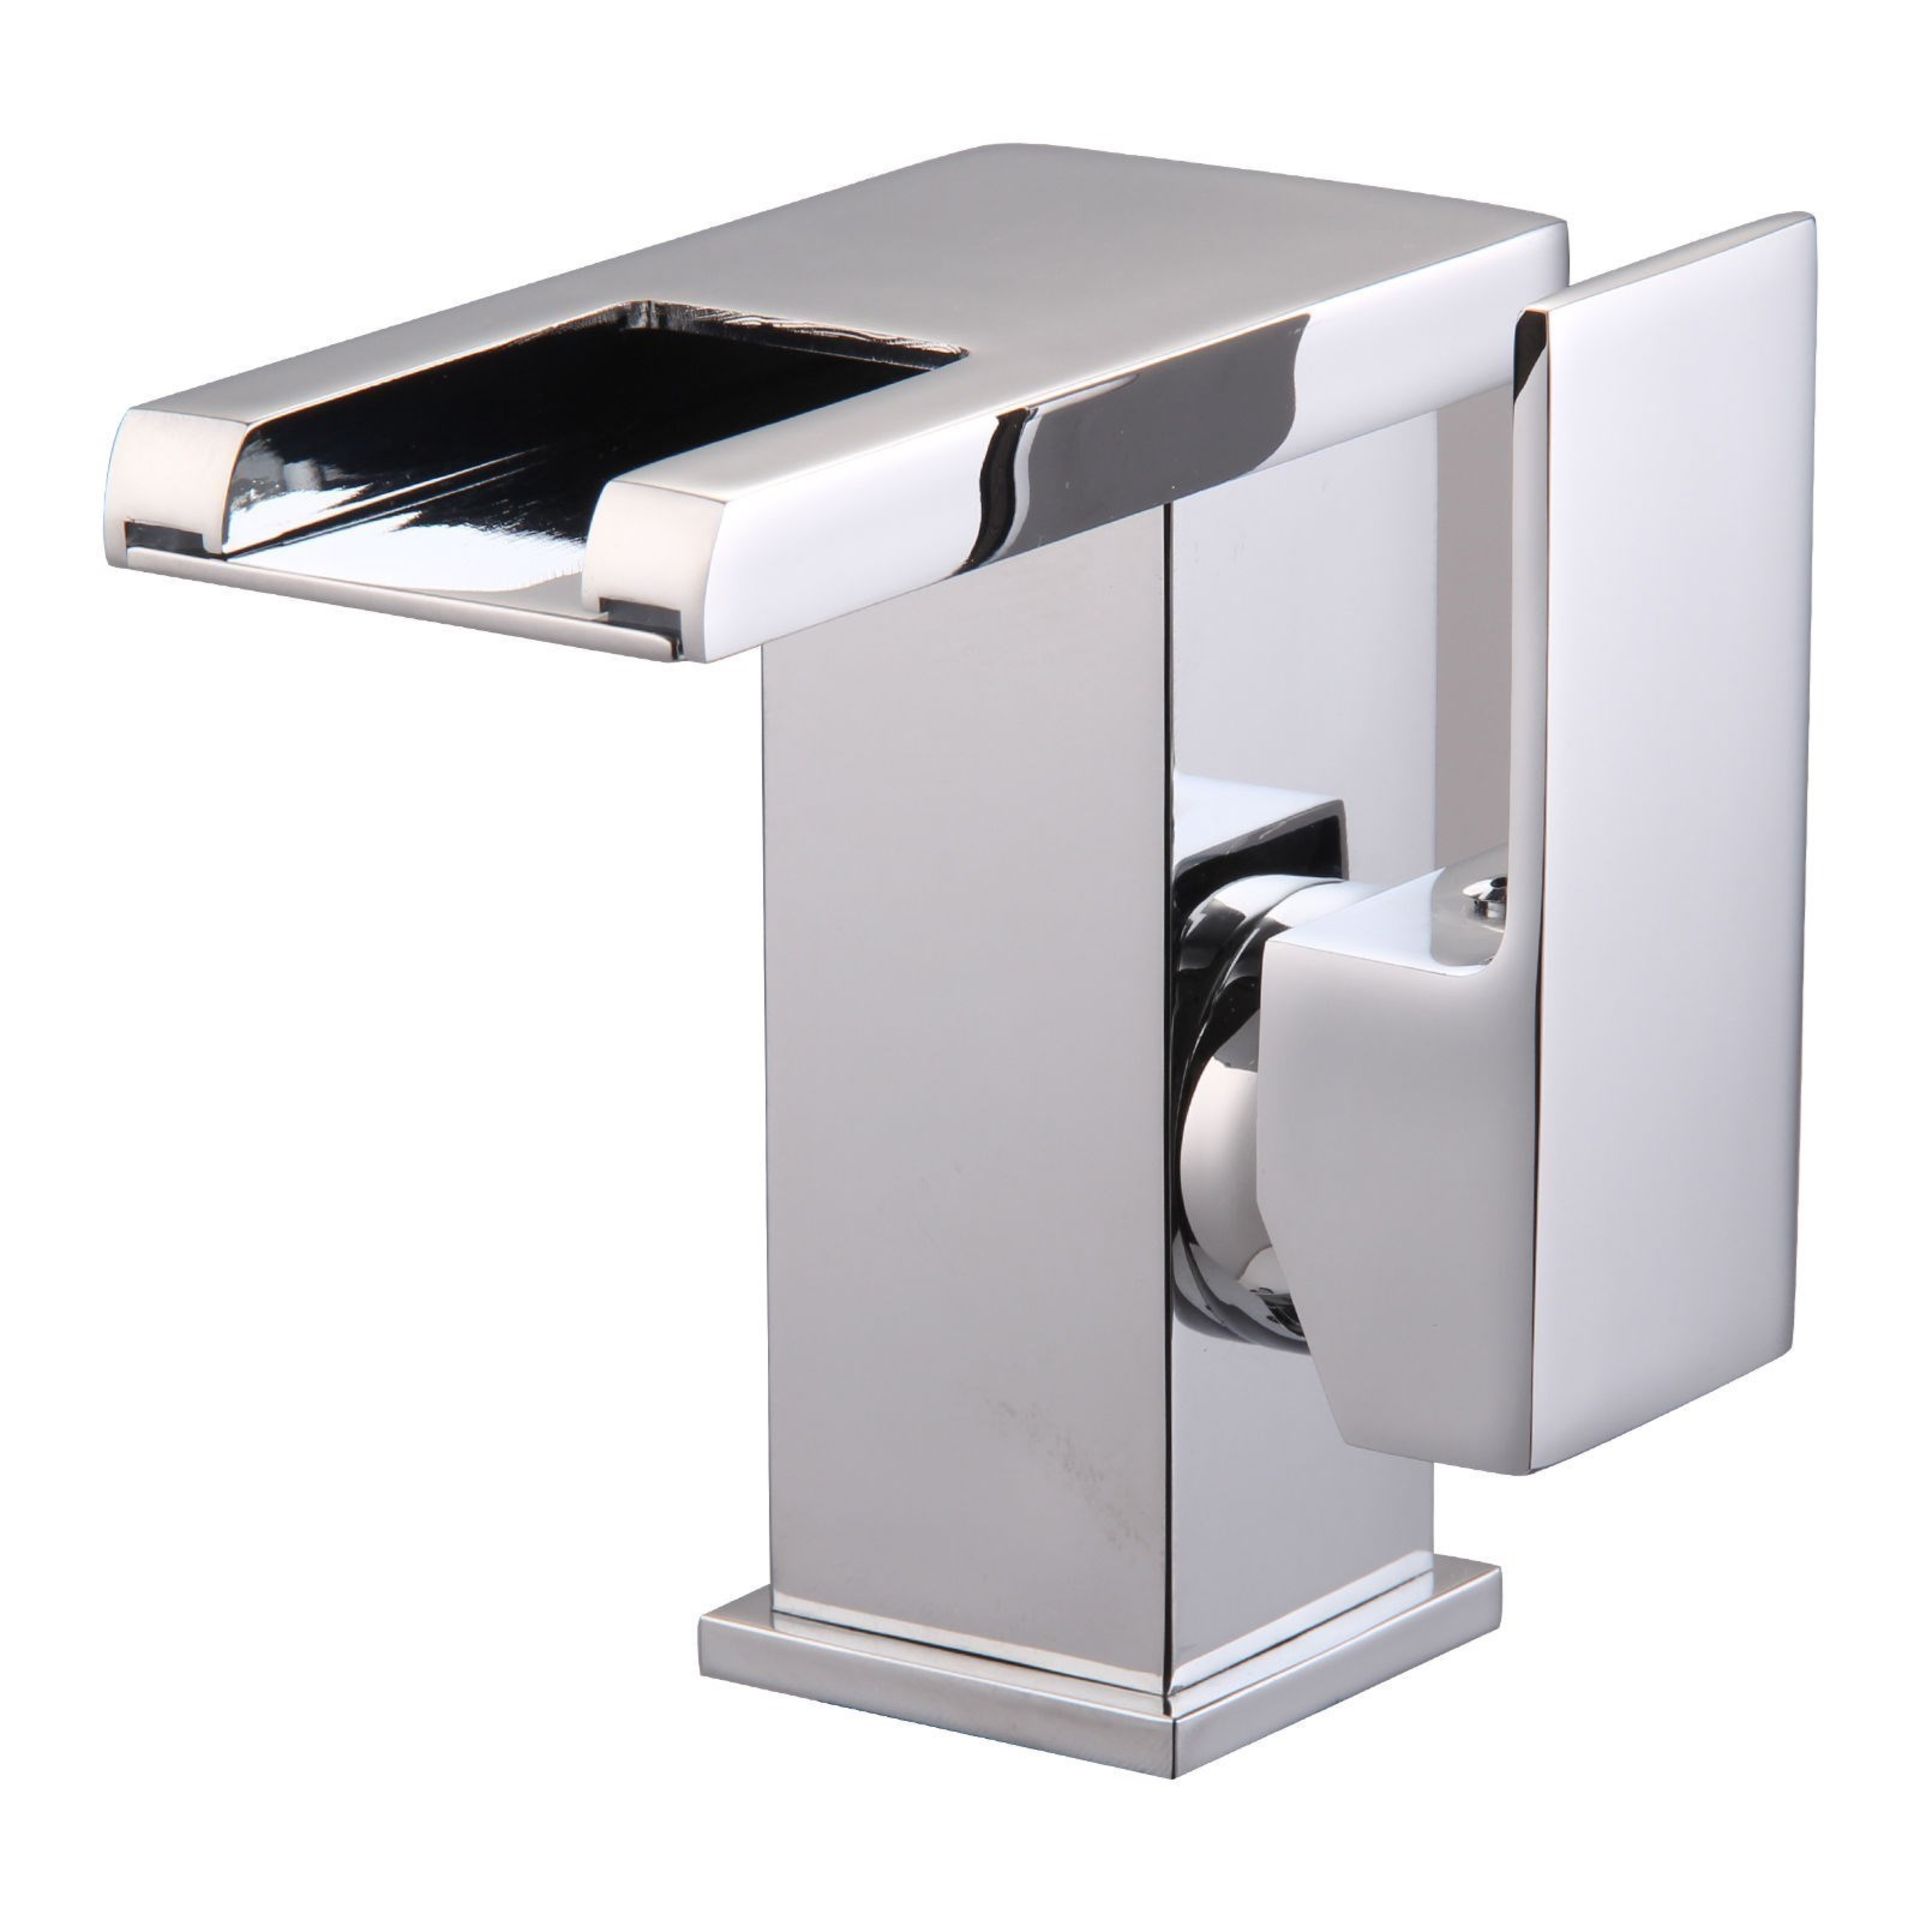 LED Waterfall Bathroom Basin Mixer Tap. RRP £229.99.Easy to install and clean. All copperLEDLED - Image 2 of 3